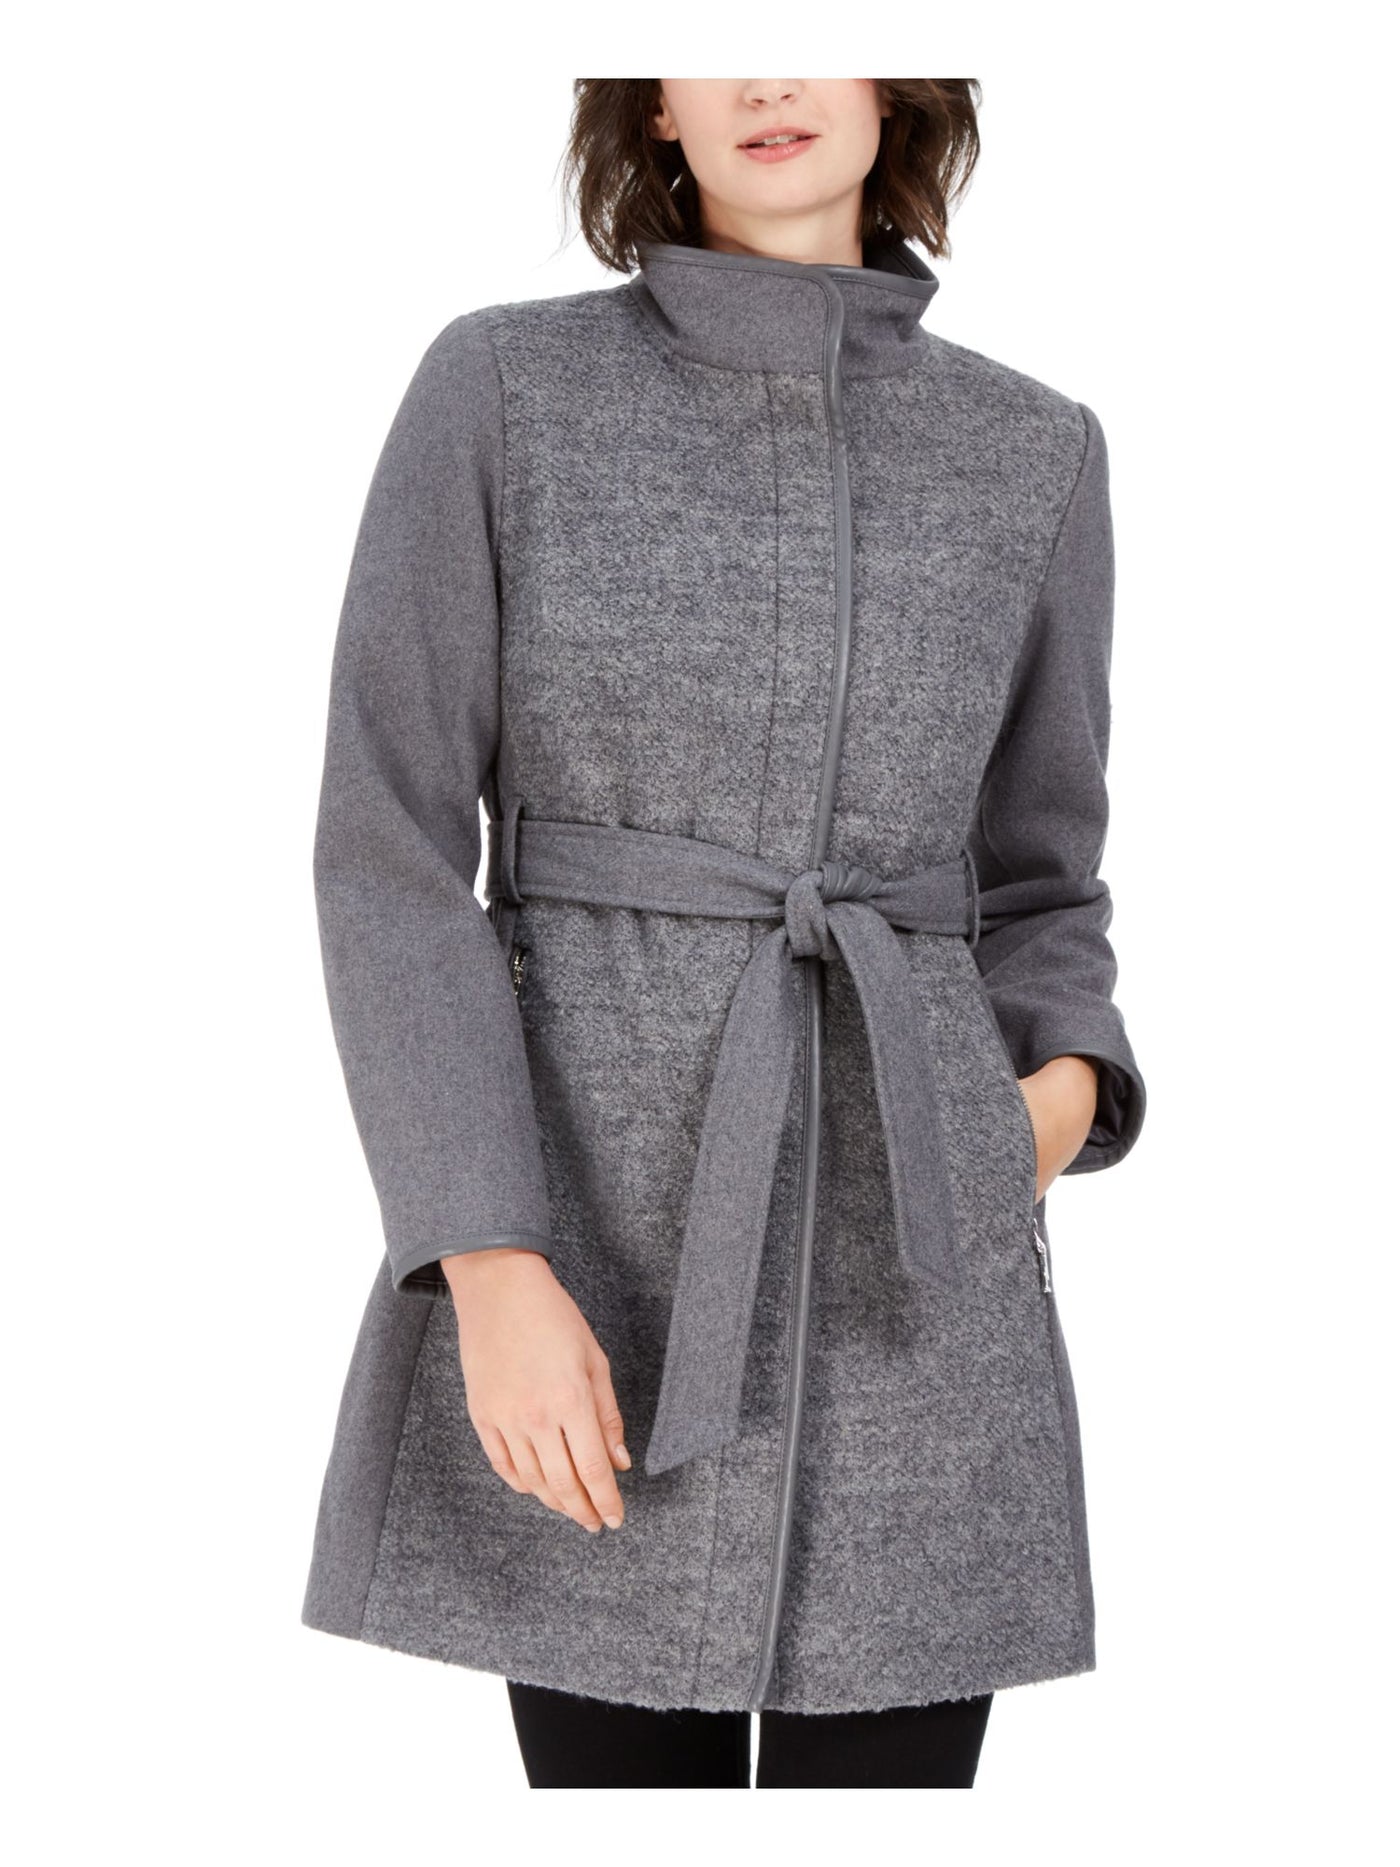 POLAROID Womens Gray Belted Coat Petites Size: PXS